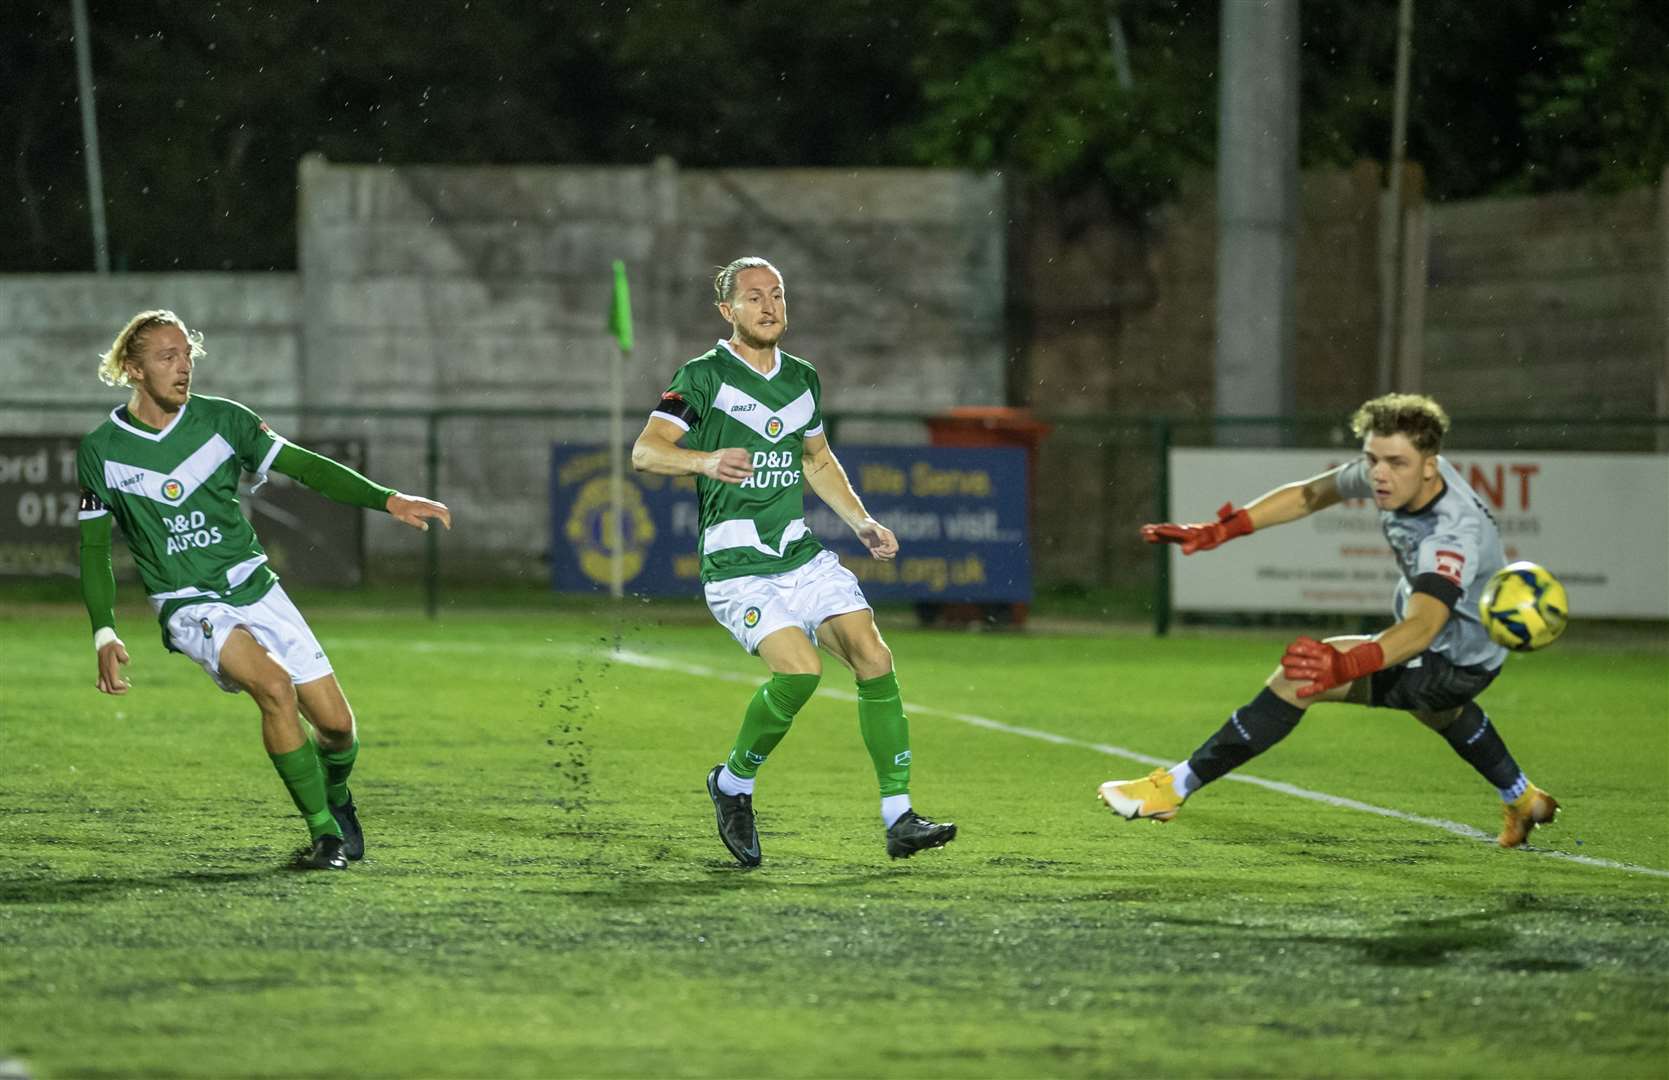 Charlie Dickens puts Ashford 2-1 up against AFC Sudbury. Picture: Ian Scammell